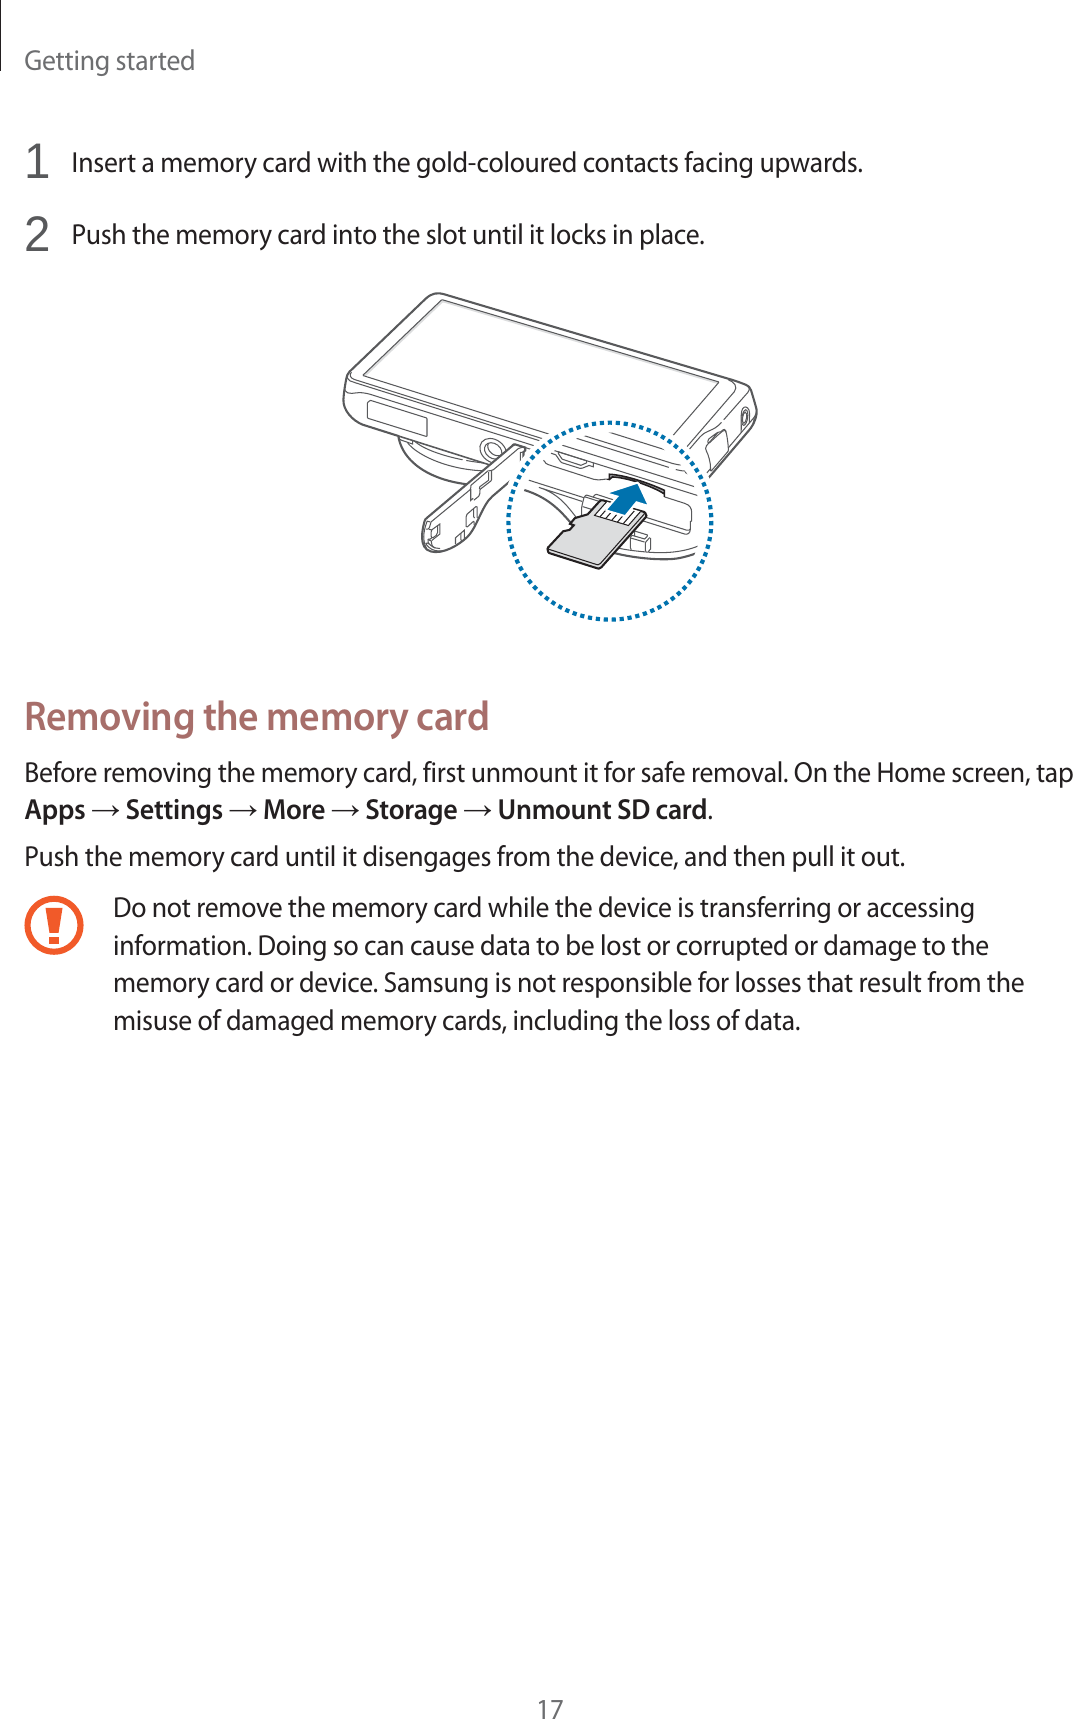 Getting started171Insert a memory card with the gold-coloured contacts facing upwards.2Push the memory card into the slot until it locks in place.Removing the memory cardBefore removing the memory card, first unmount it for safe removal. On the Home screen, tap Apps ĺ Settings ĺ More ĺ Storage ĺ Unmount SD card.Push the memory card until it disengages from the device, and then pull it out.Do not remove the memory card while the device is transferring or accessing information. Doing so can cause data to be lost or corrupted or damage to the memory card or device. Samsung is not responsible for losses that result from the misuse of damaged memory cards, including the loss of data.